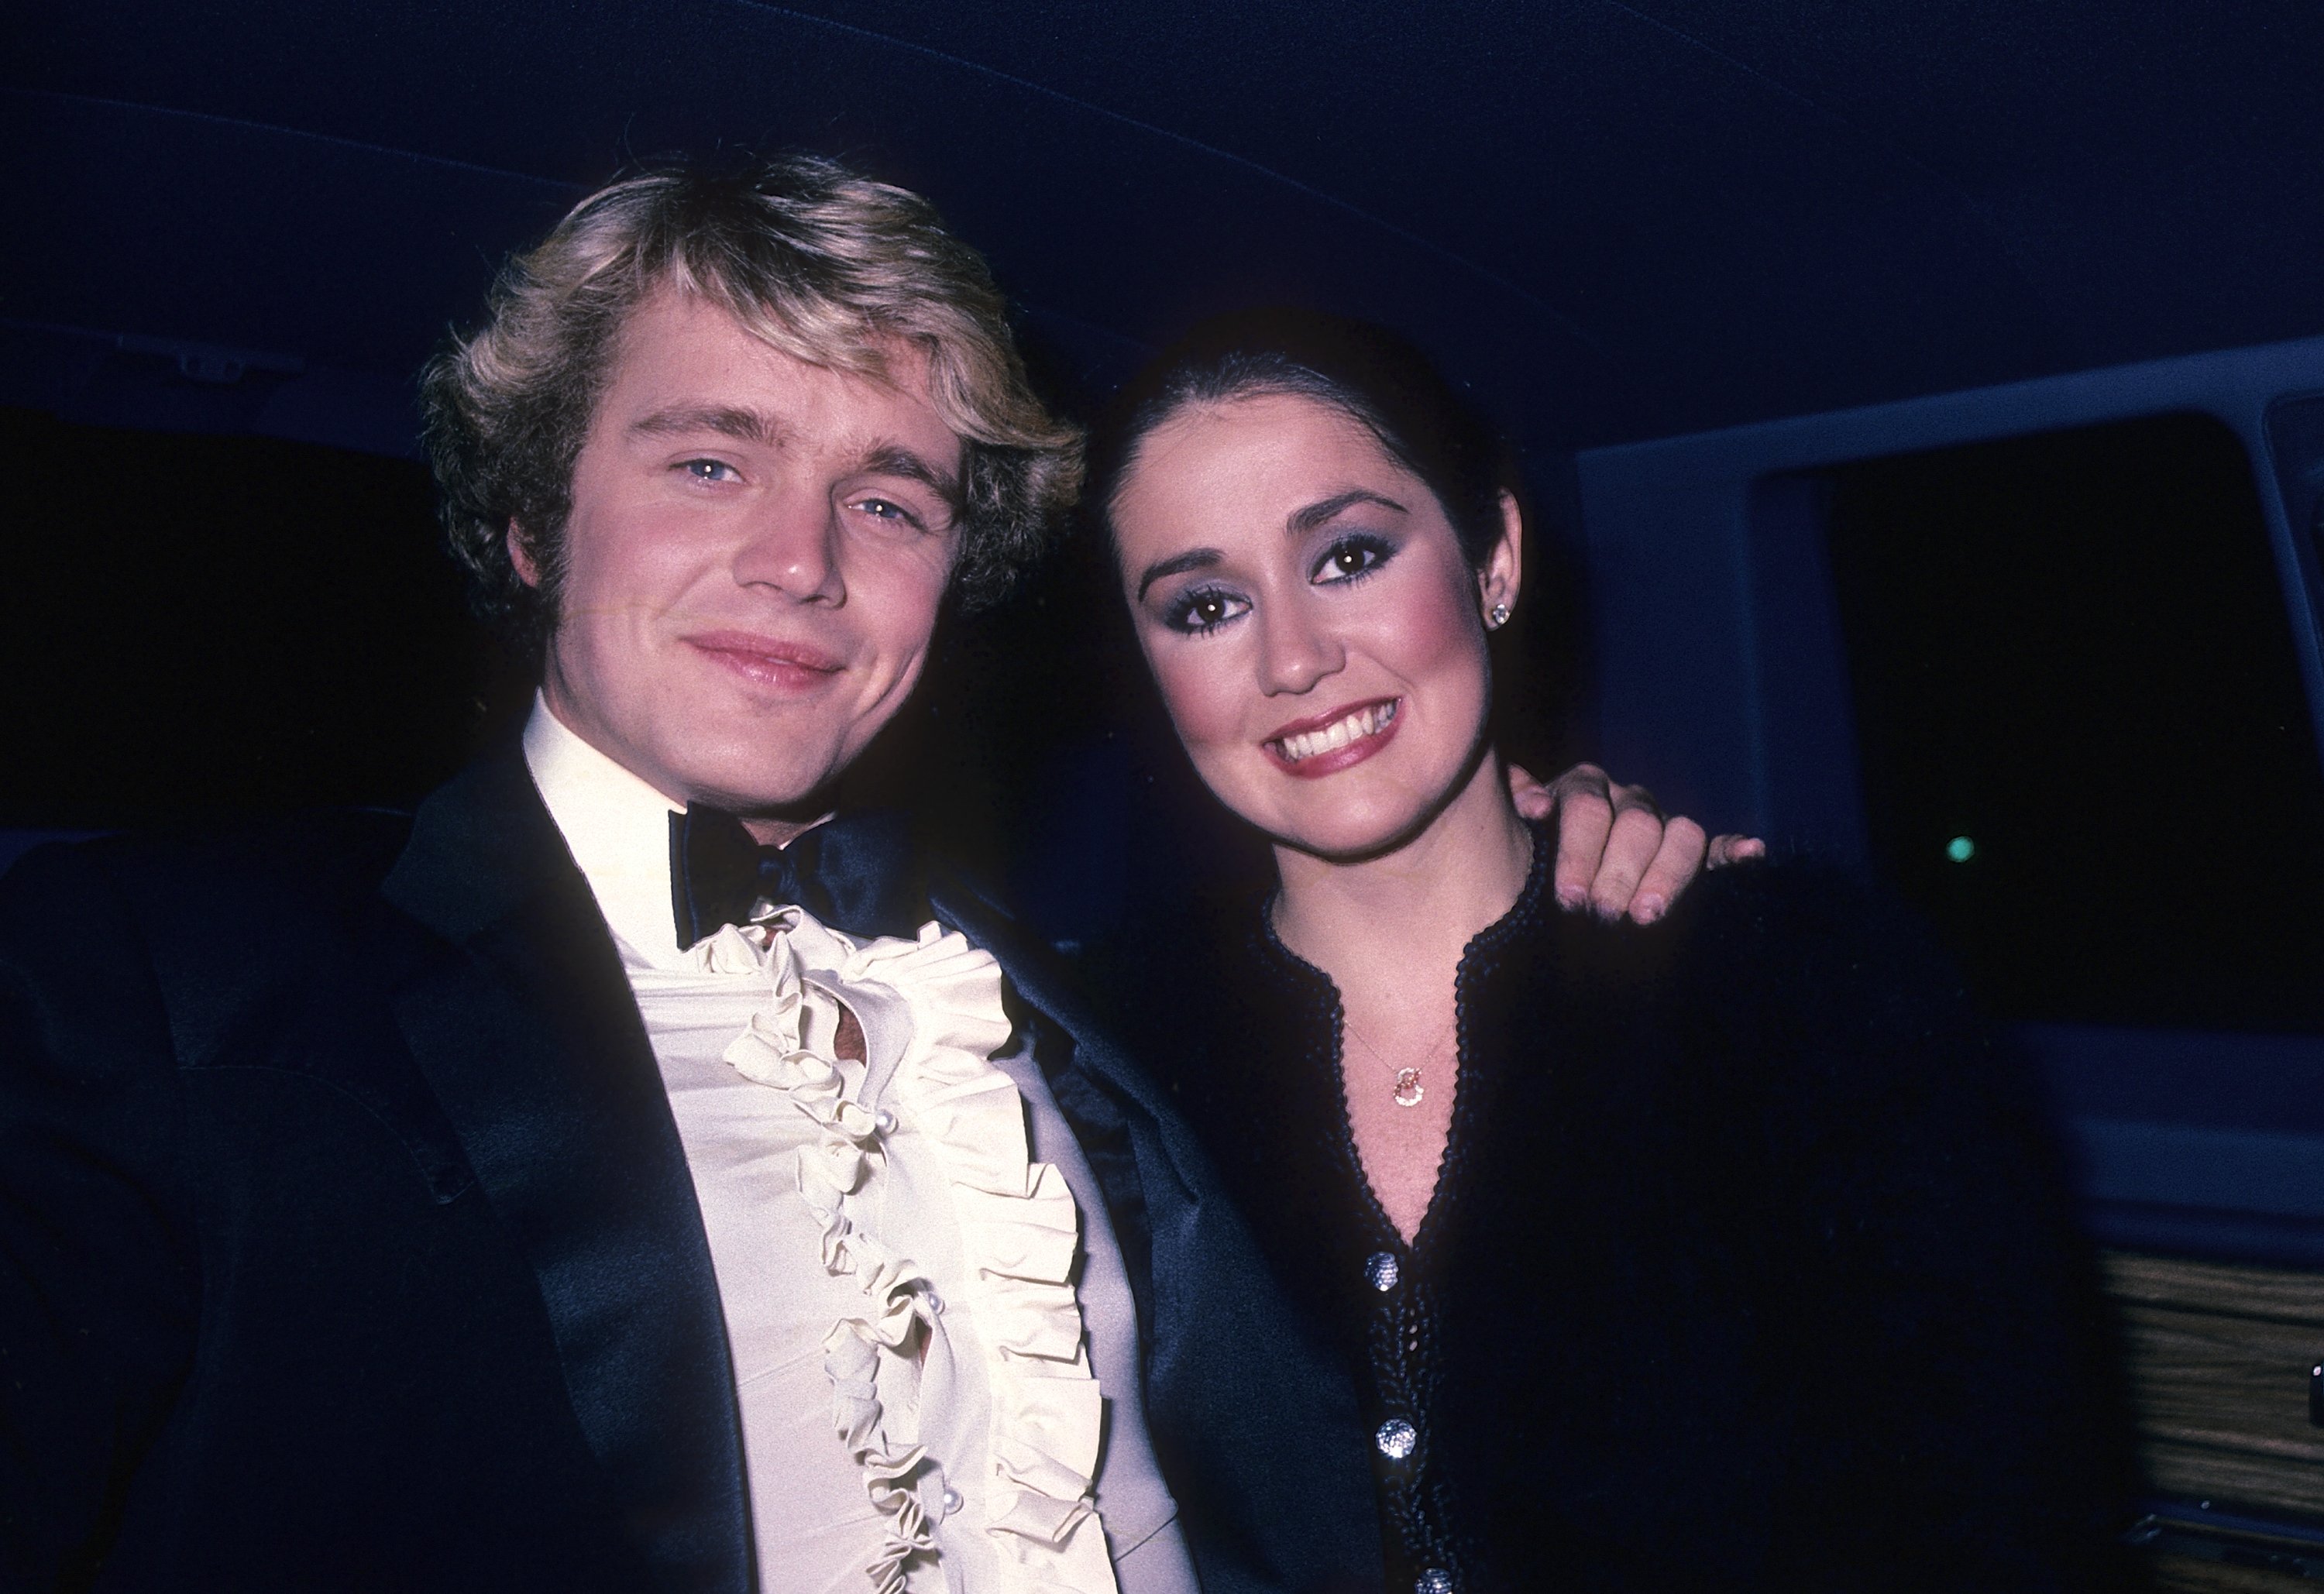 John Schneider and Tawny Little attend the American Video Association's First Annual American Video Awards on April 6, 1983 at the Beverly Theatre in Beverly Hills, California | Photo: GettyImages